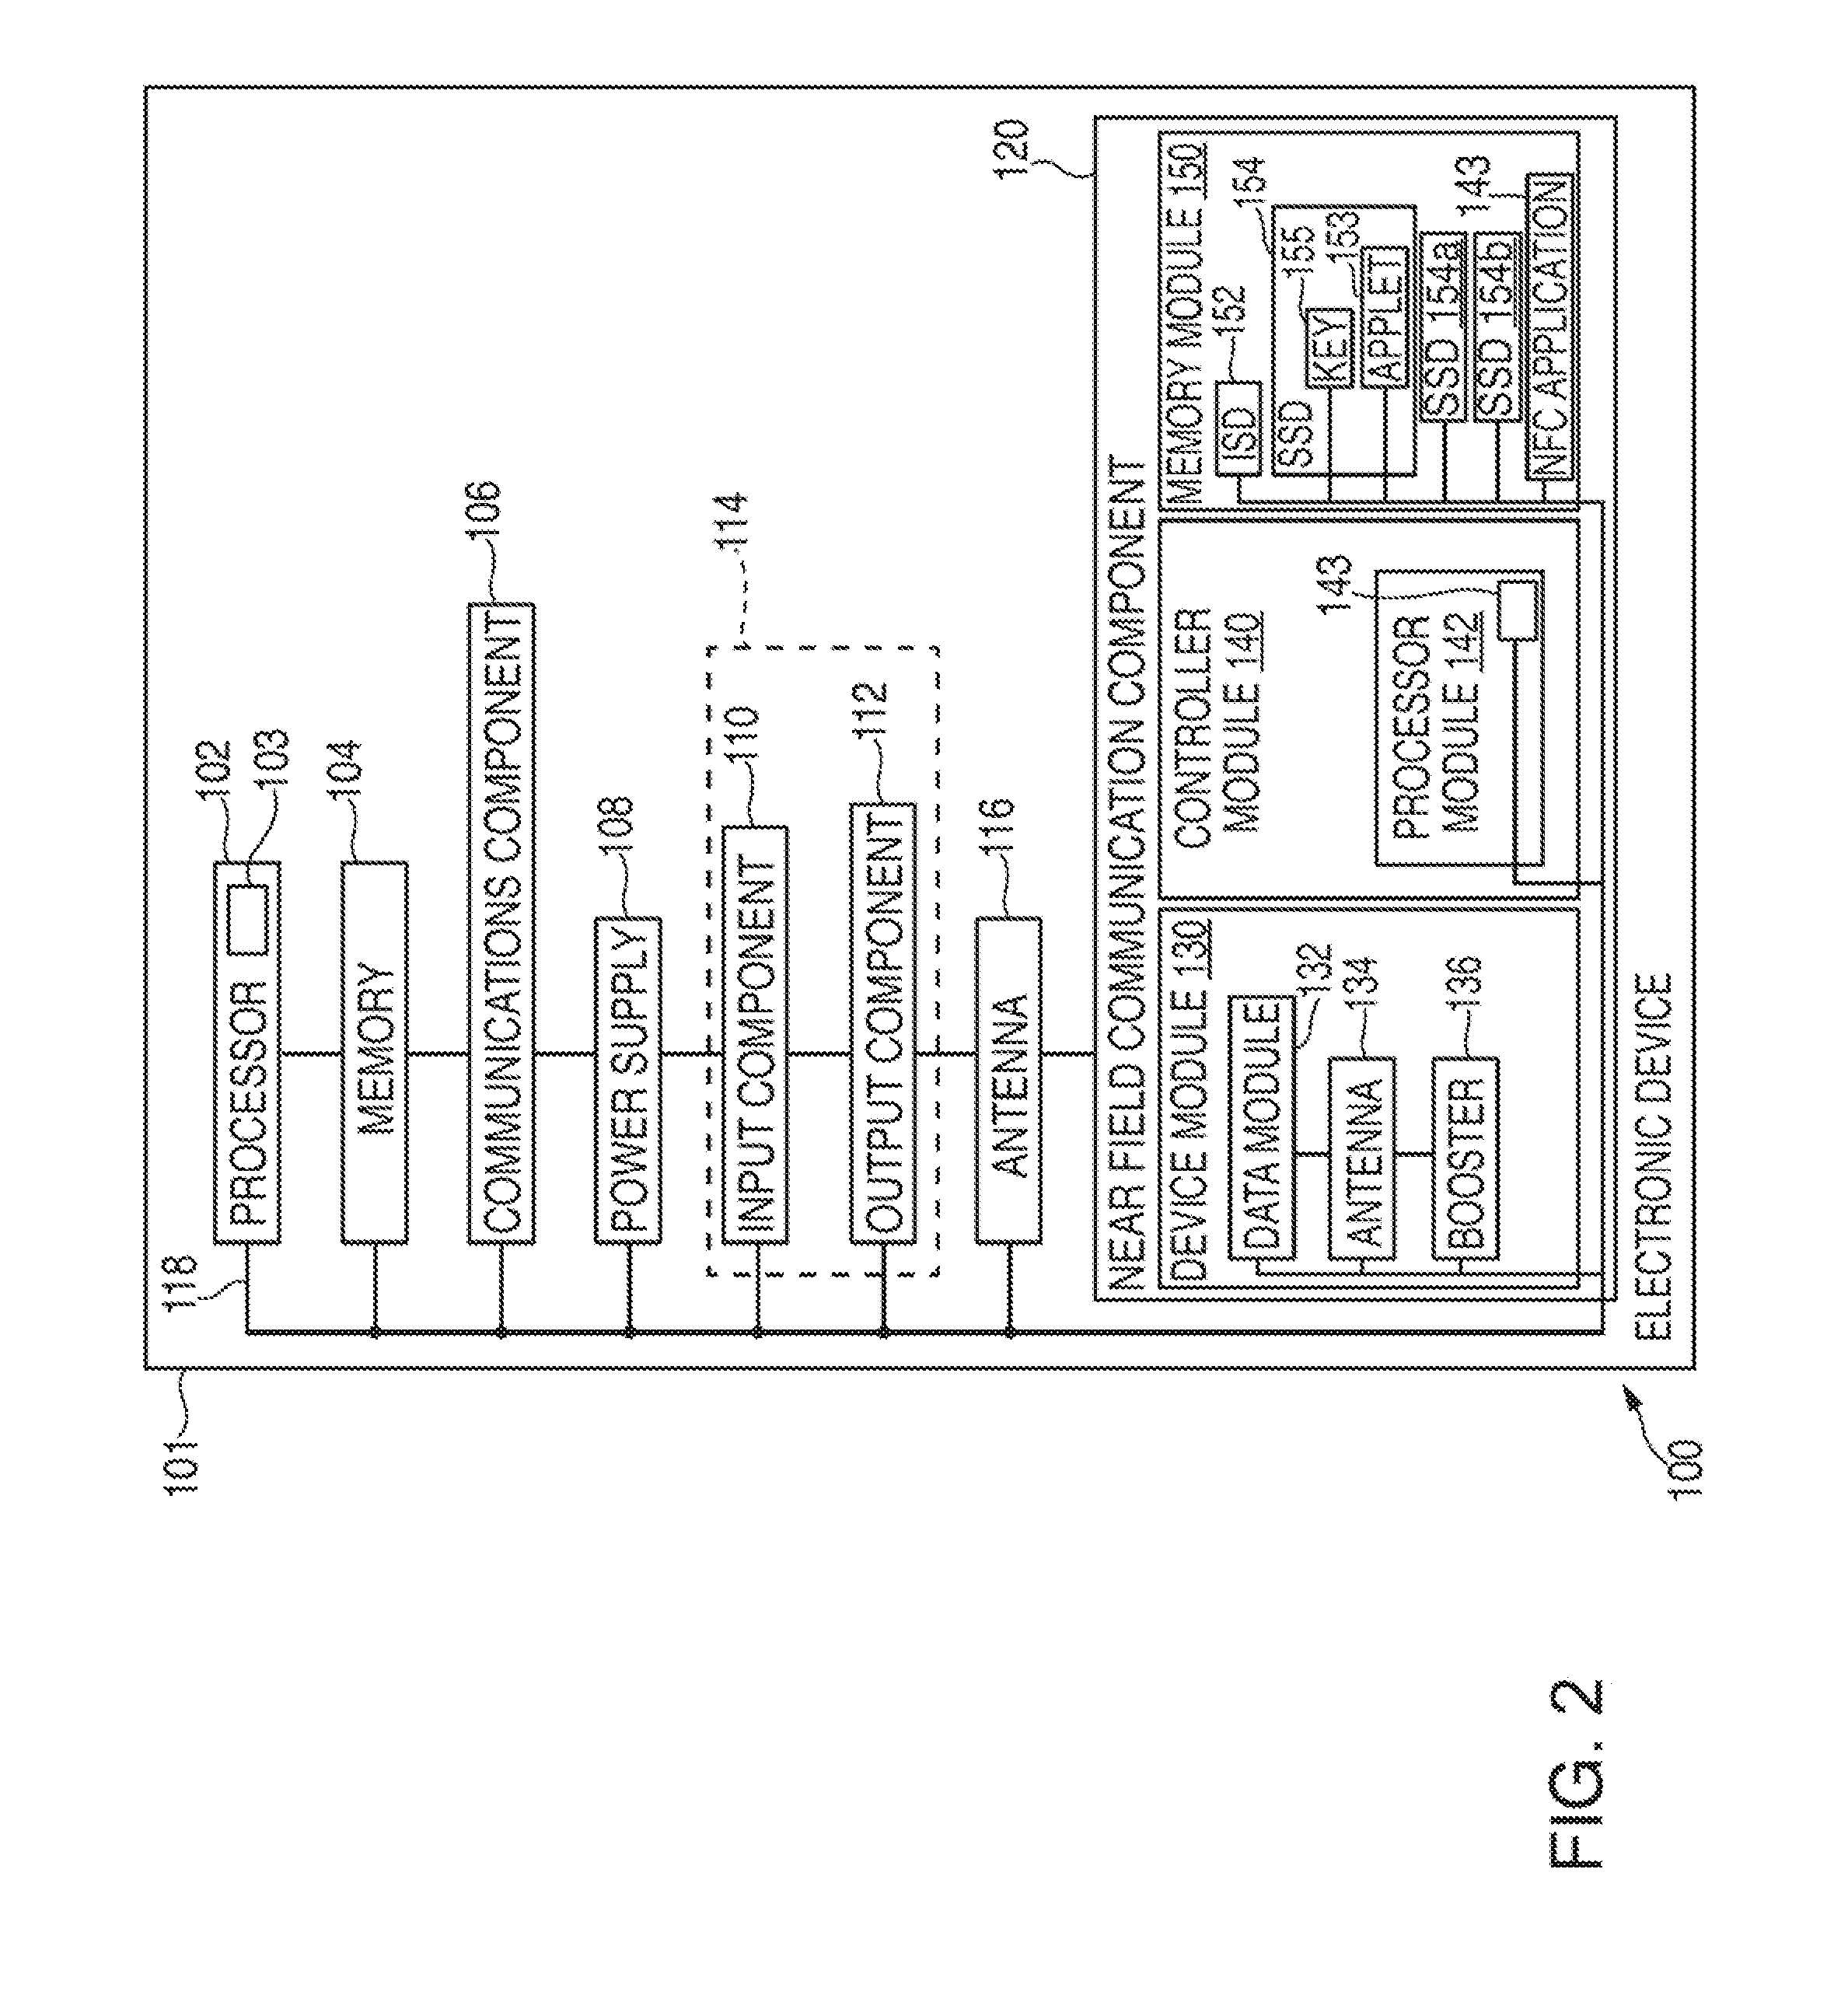 Secure provisioning of credentials on an electronic device